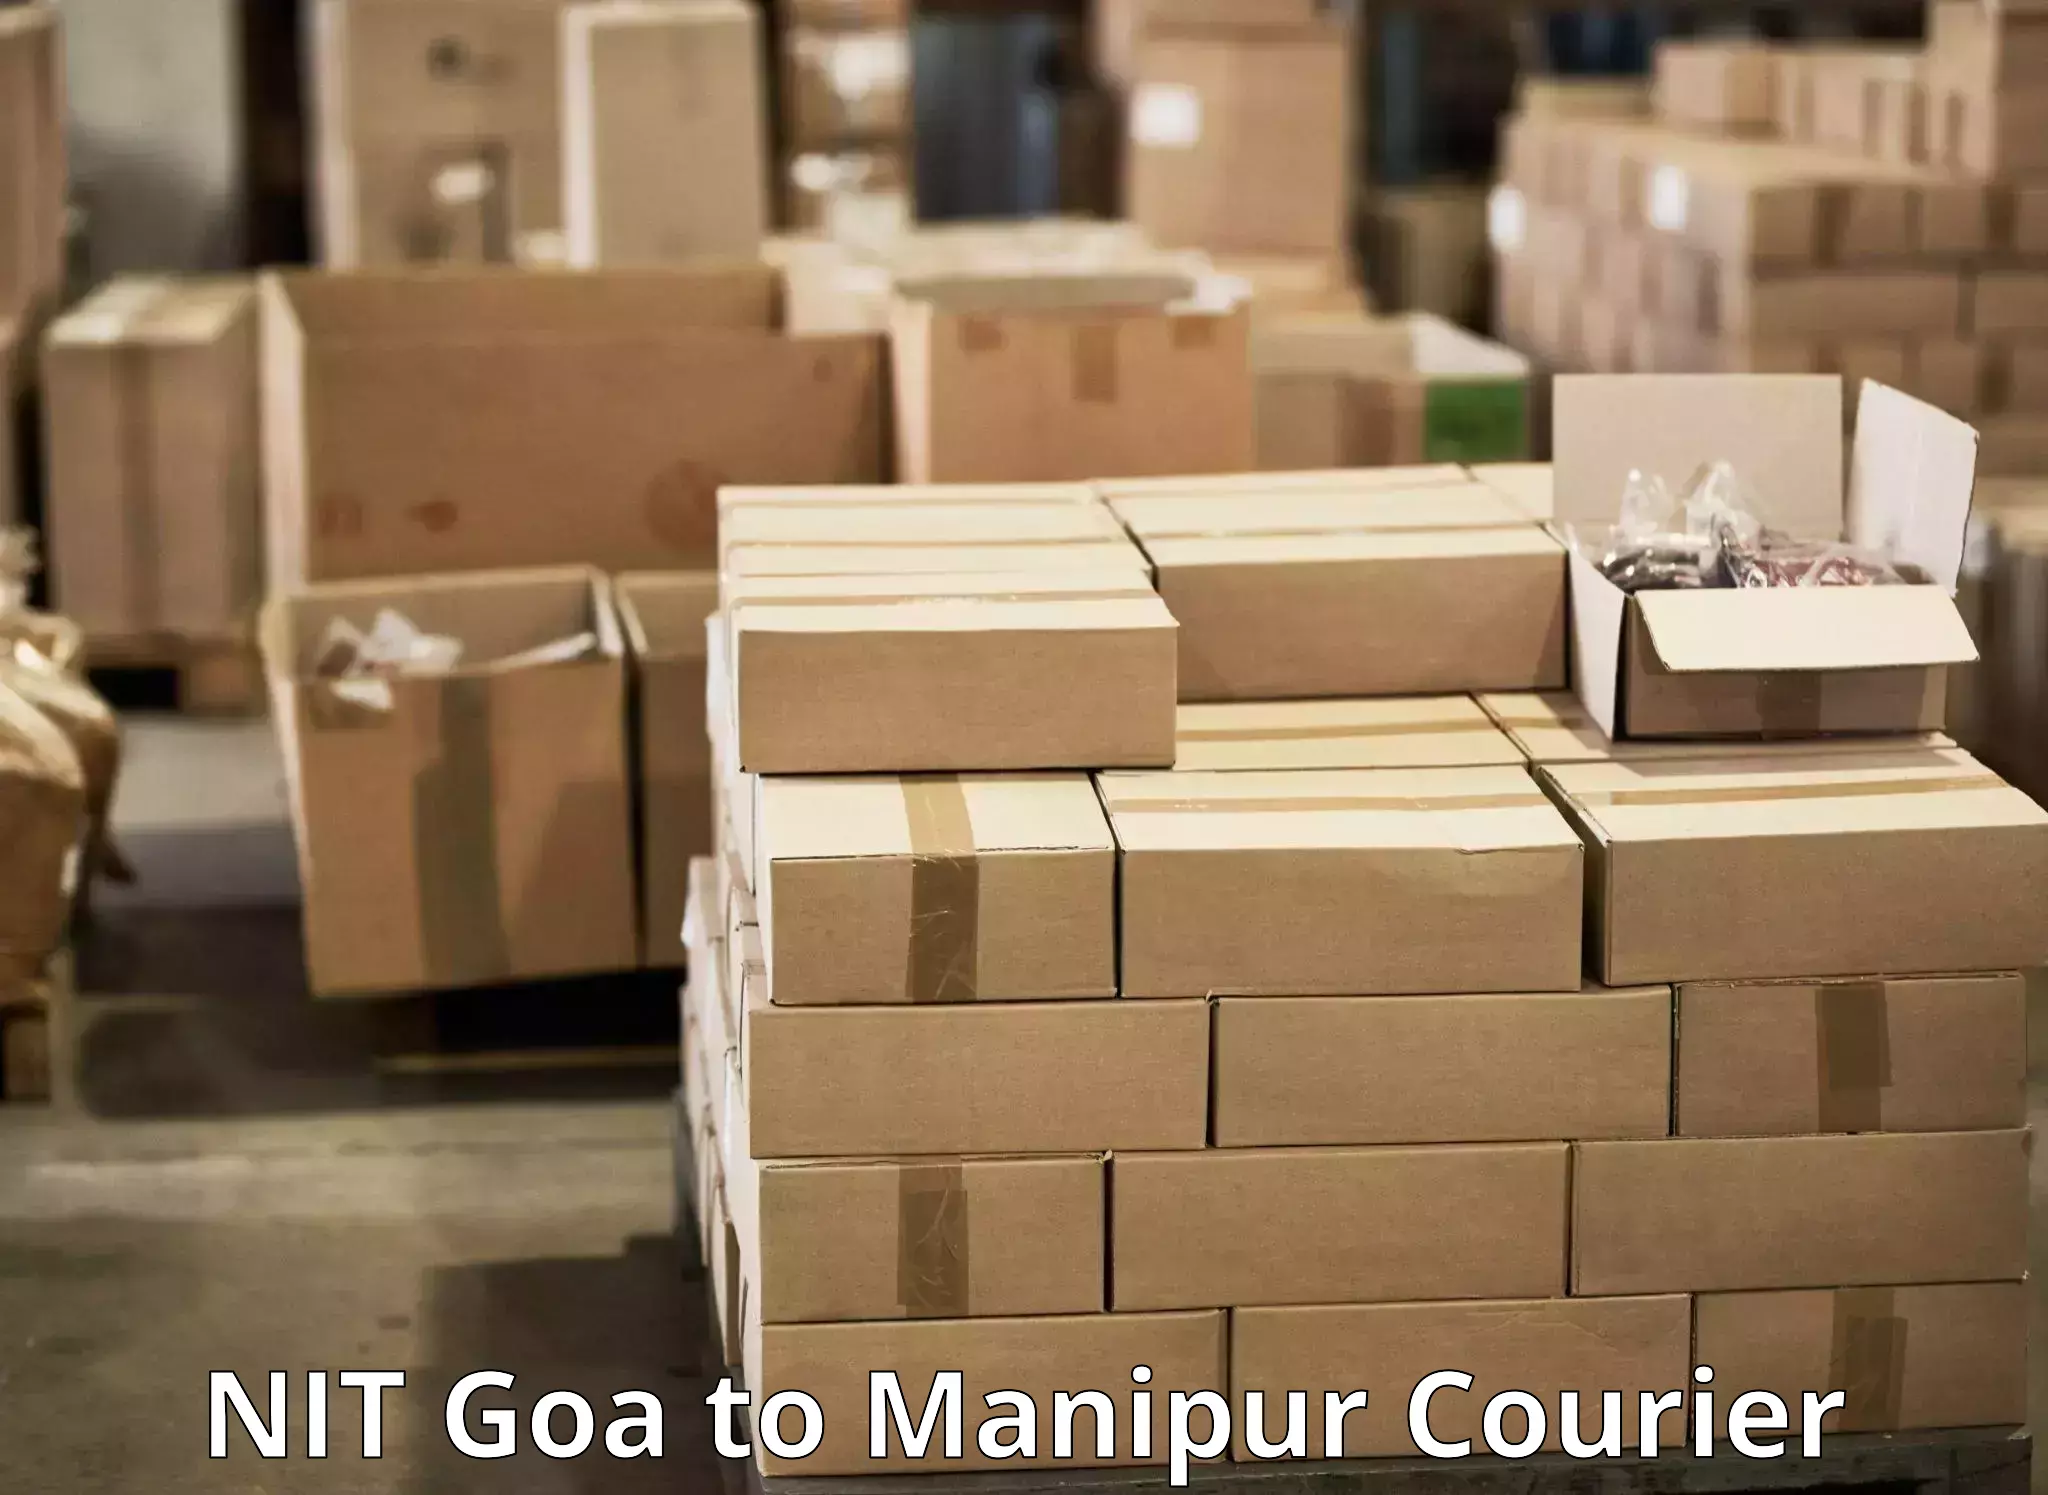 Express mail solutions NIT Goa to Imphal